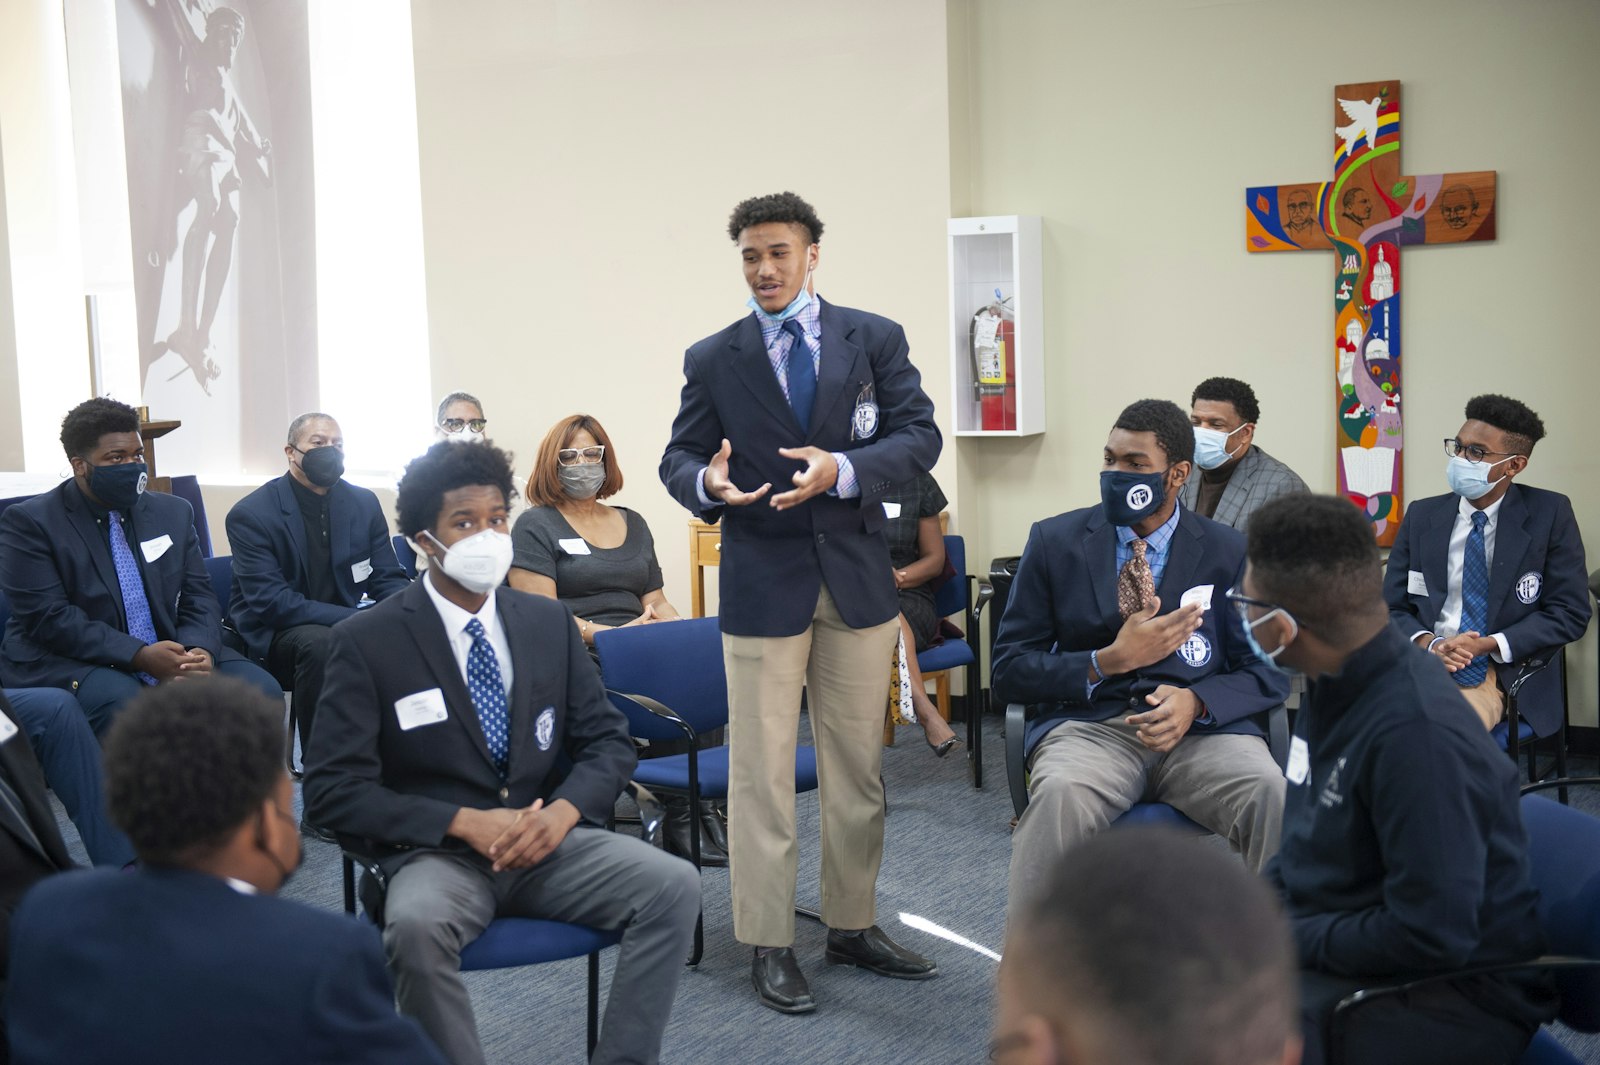 A Loyola High School student talks about what the school means to him during a roundtable with supporters of the school following the scholarship announcement Feb. 14, Frederick Douglass Day.